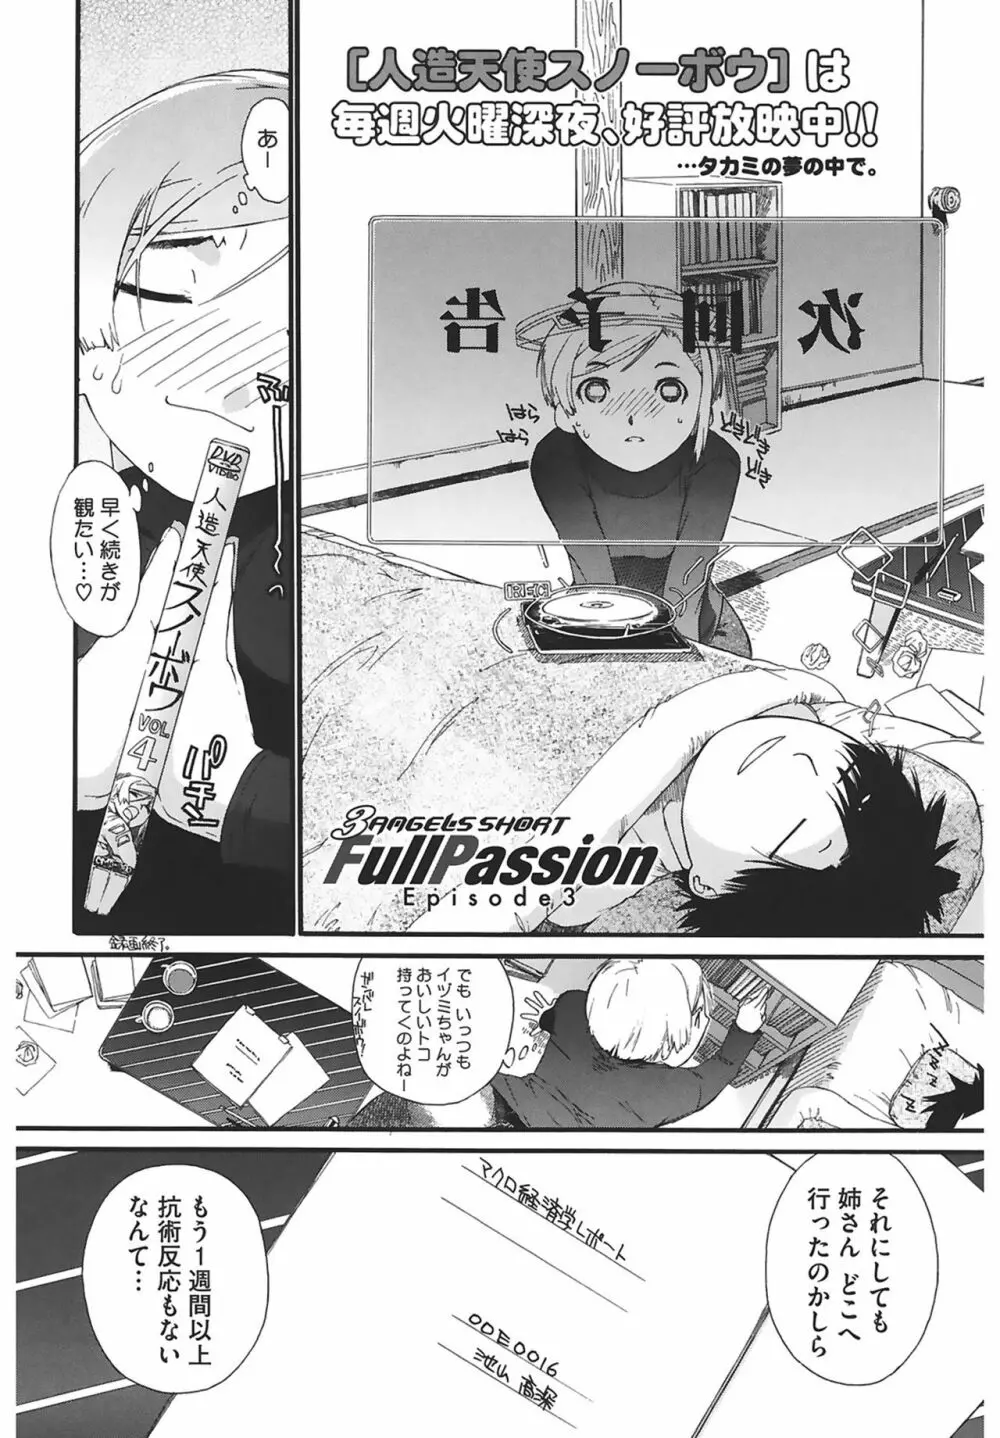 3ANGELS SHORT Full Passion Page.68